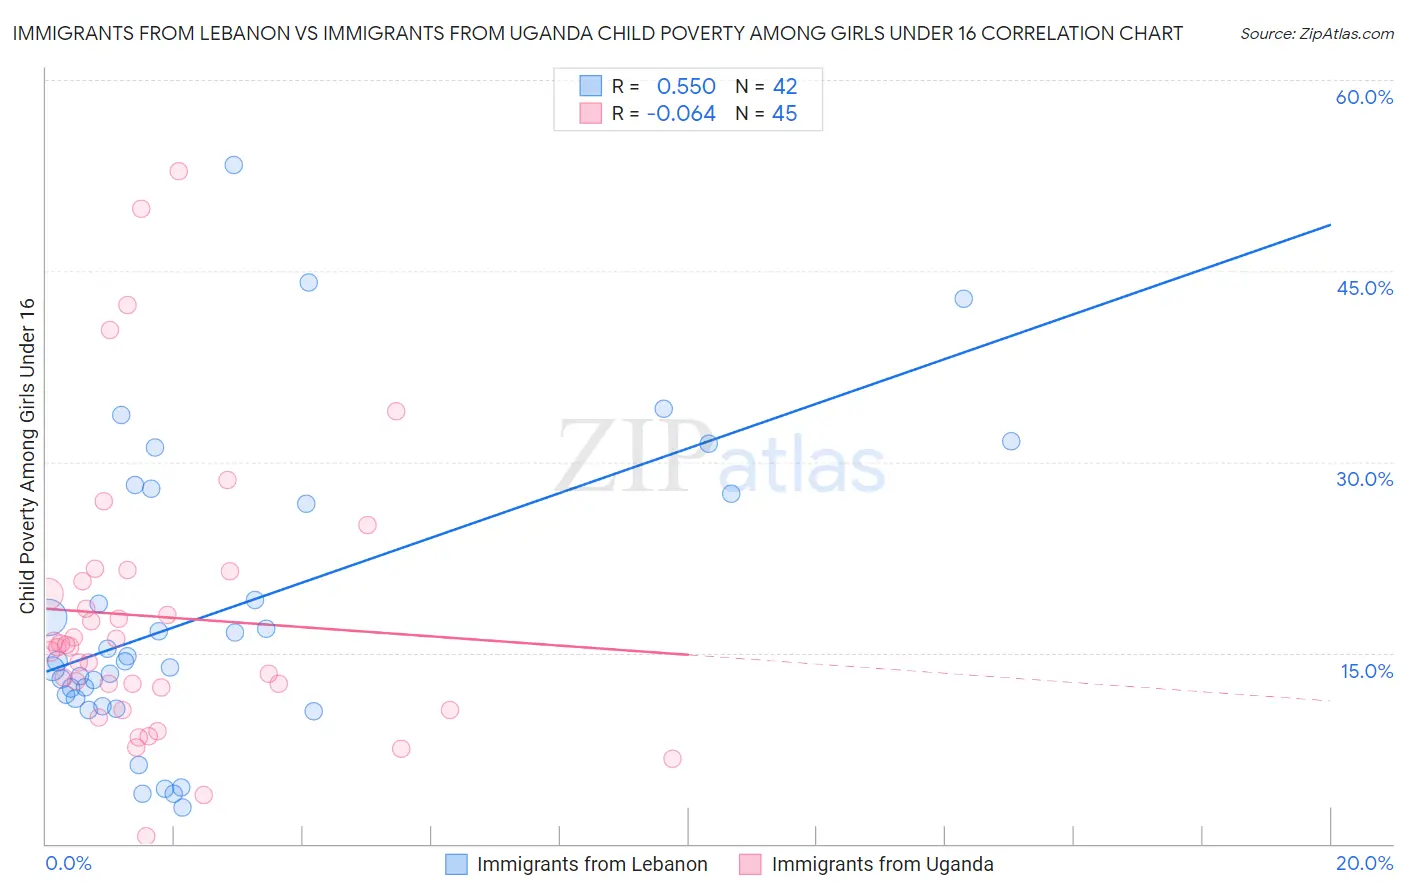 Immigrants from Lebanon vs Immigrants from Uganda Child Poverty Among Girls Under 16